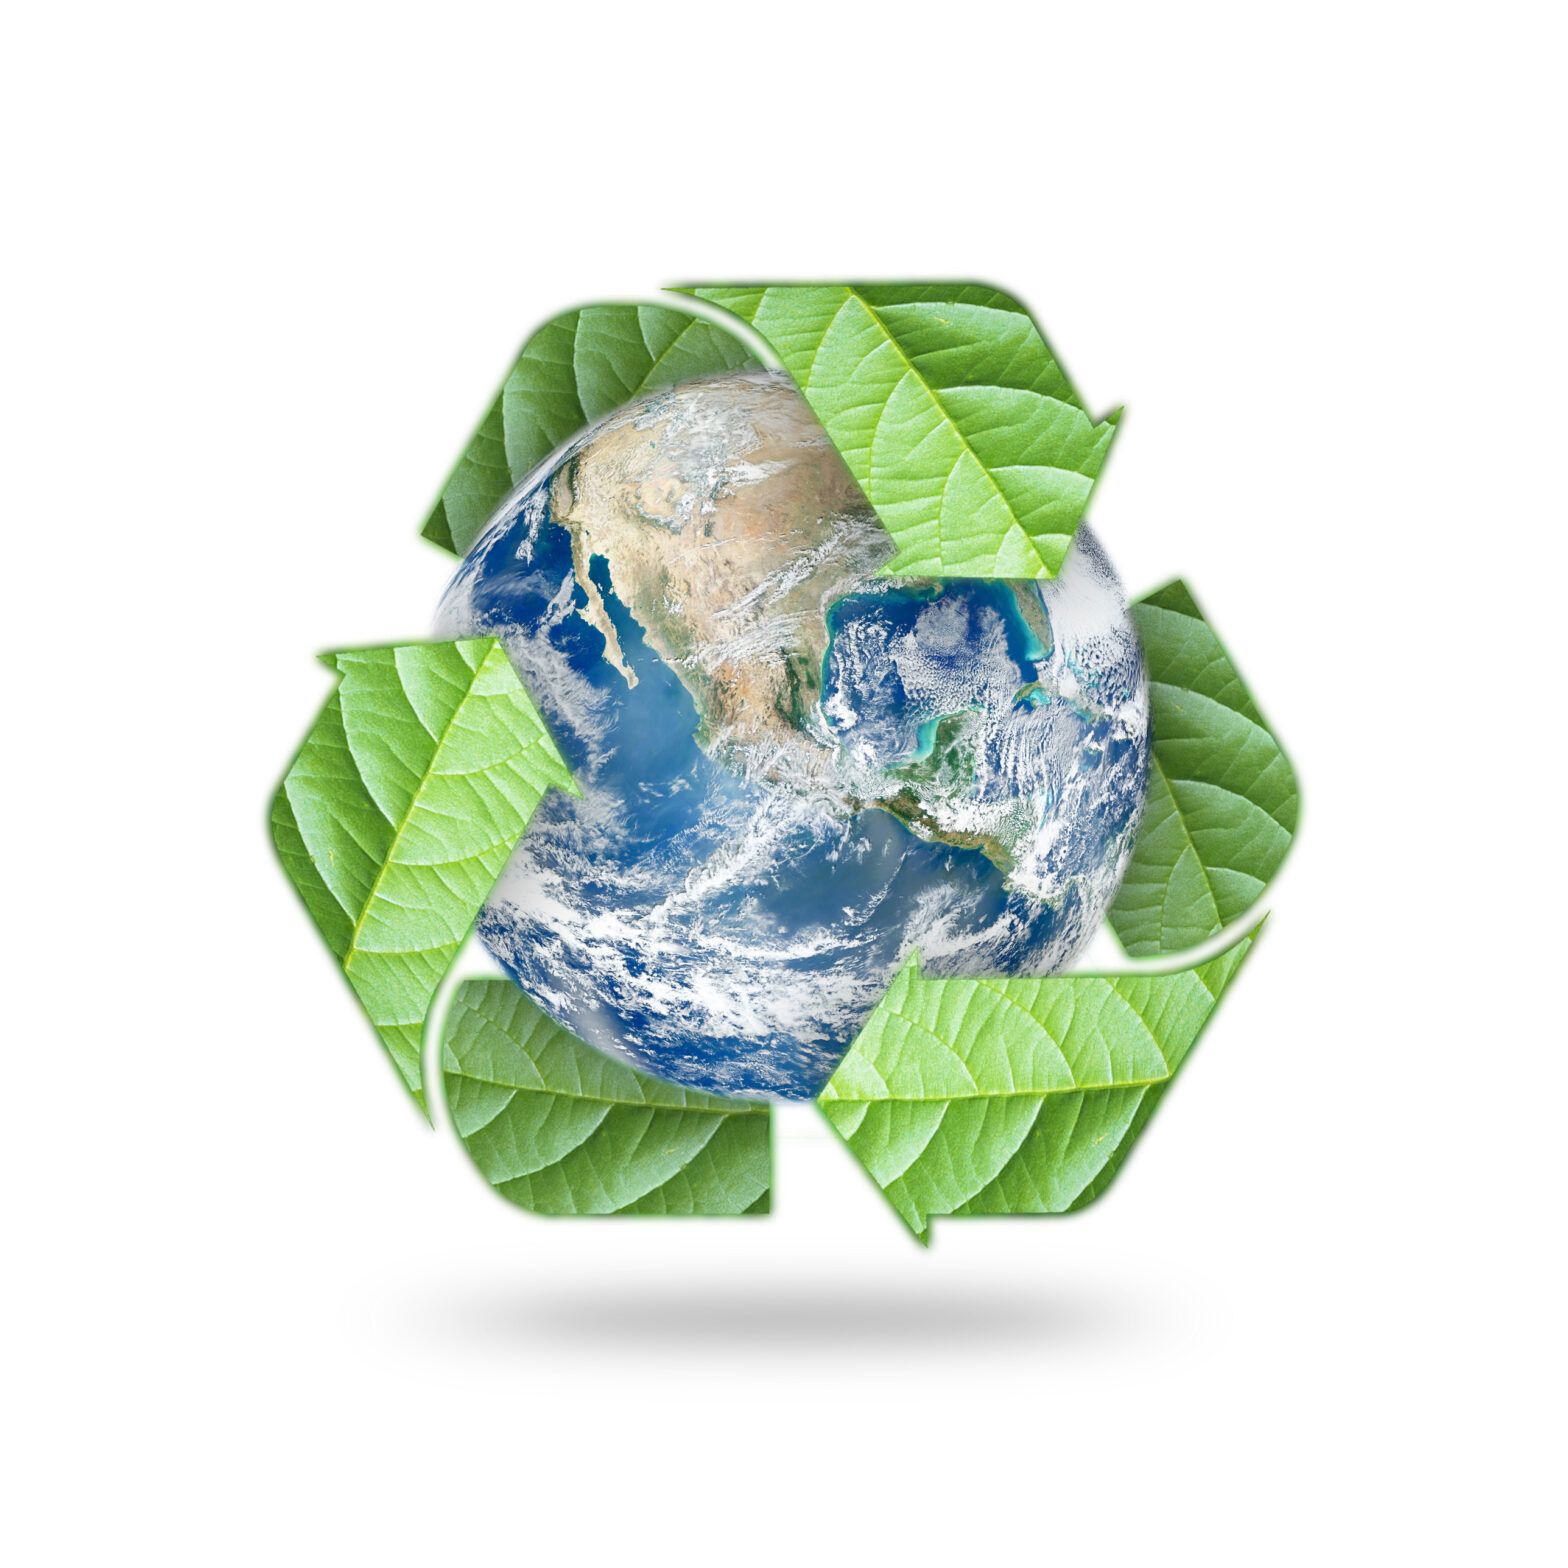 Businesses at the forefront of the circular economy